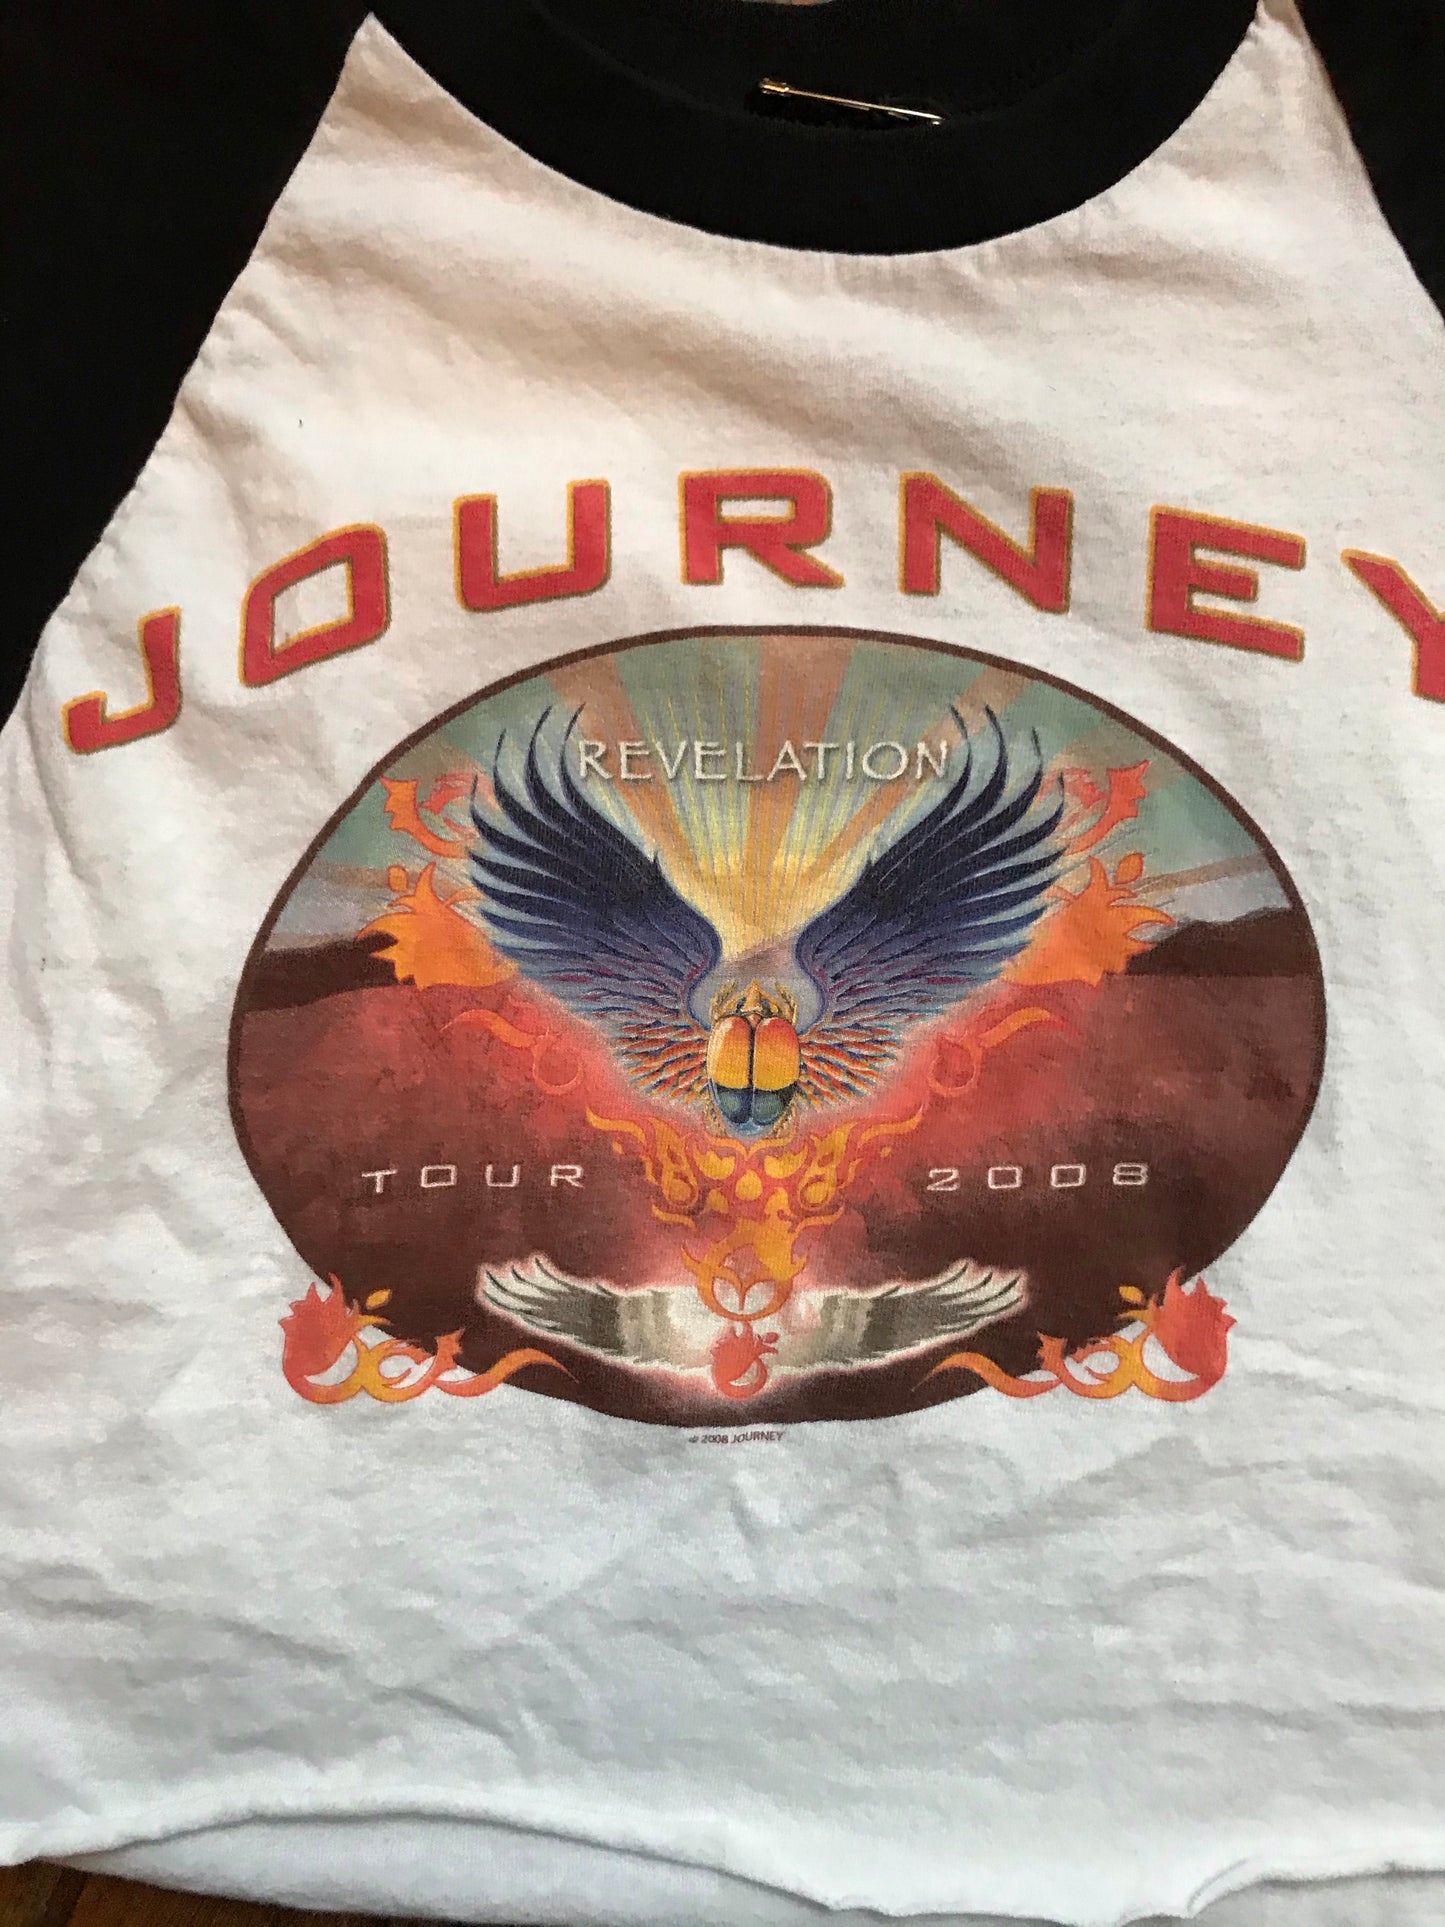 Journey 2008 Cropped Tour Shirt